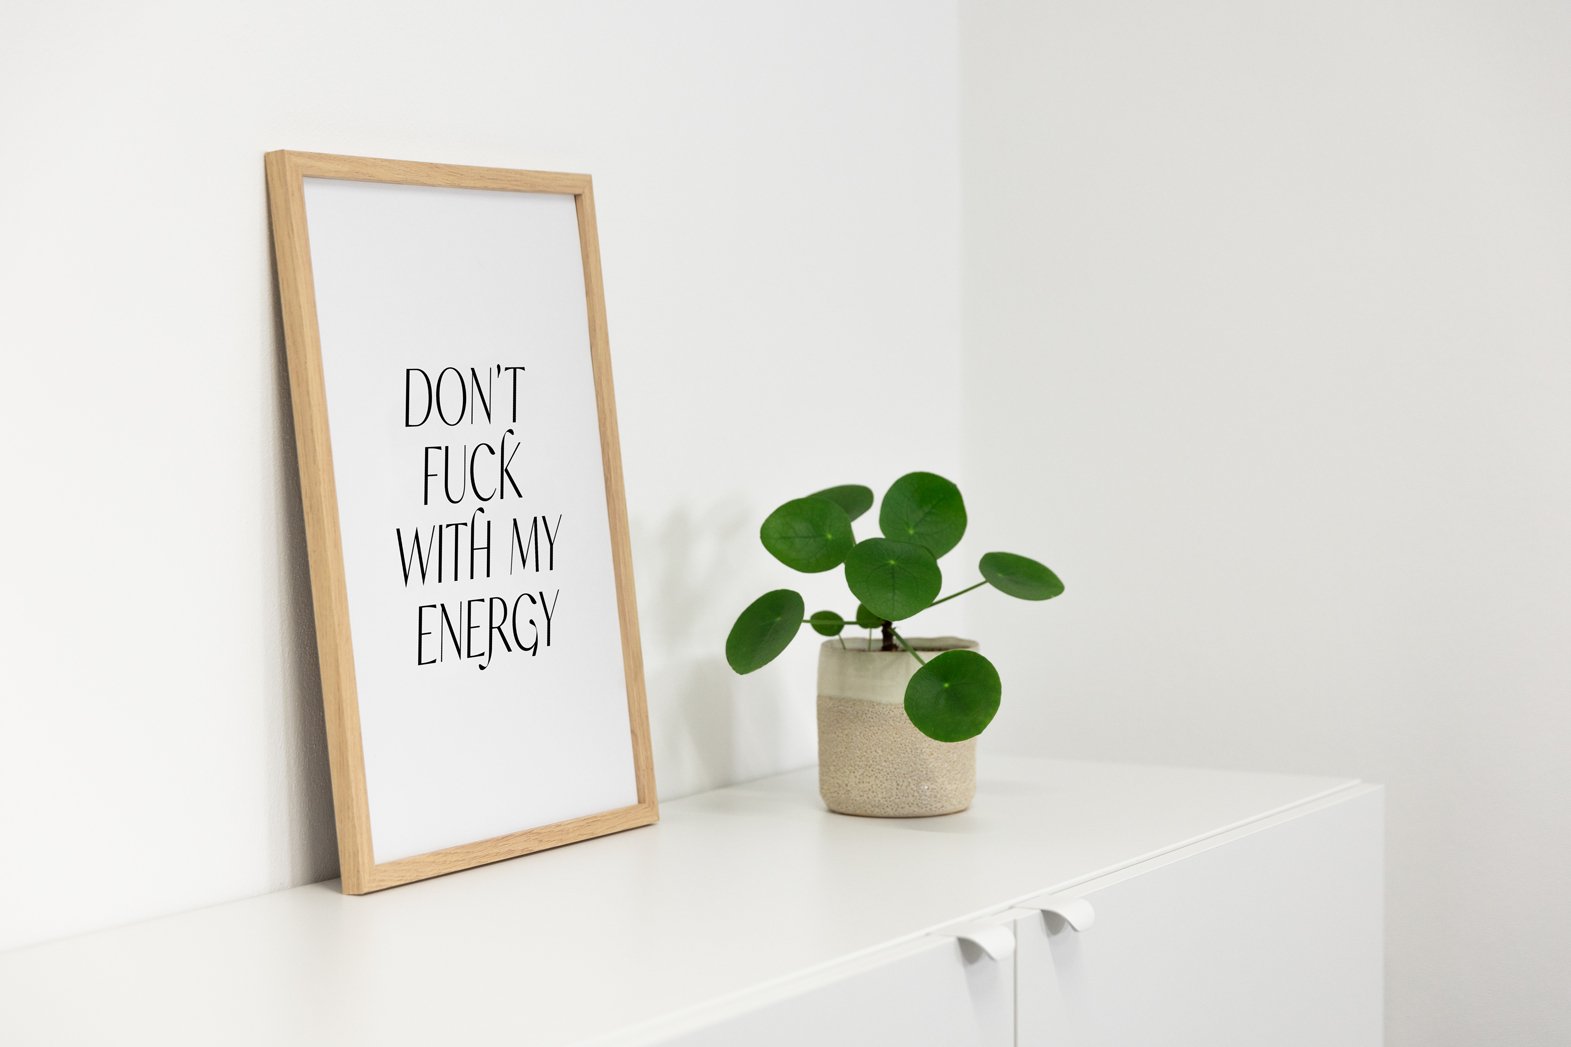 POSTER STATEMENTS – DON&#39;T FUCK WITH MY ENERGY - Studio Schön®